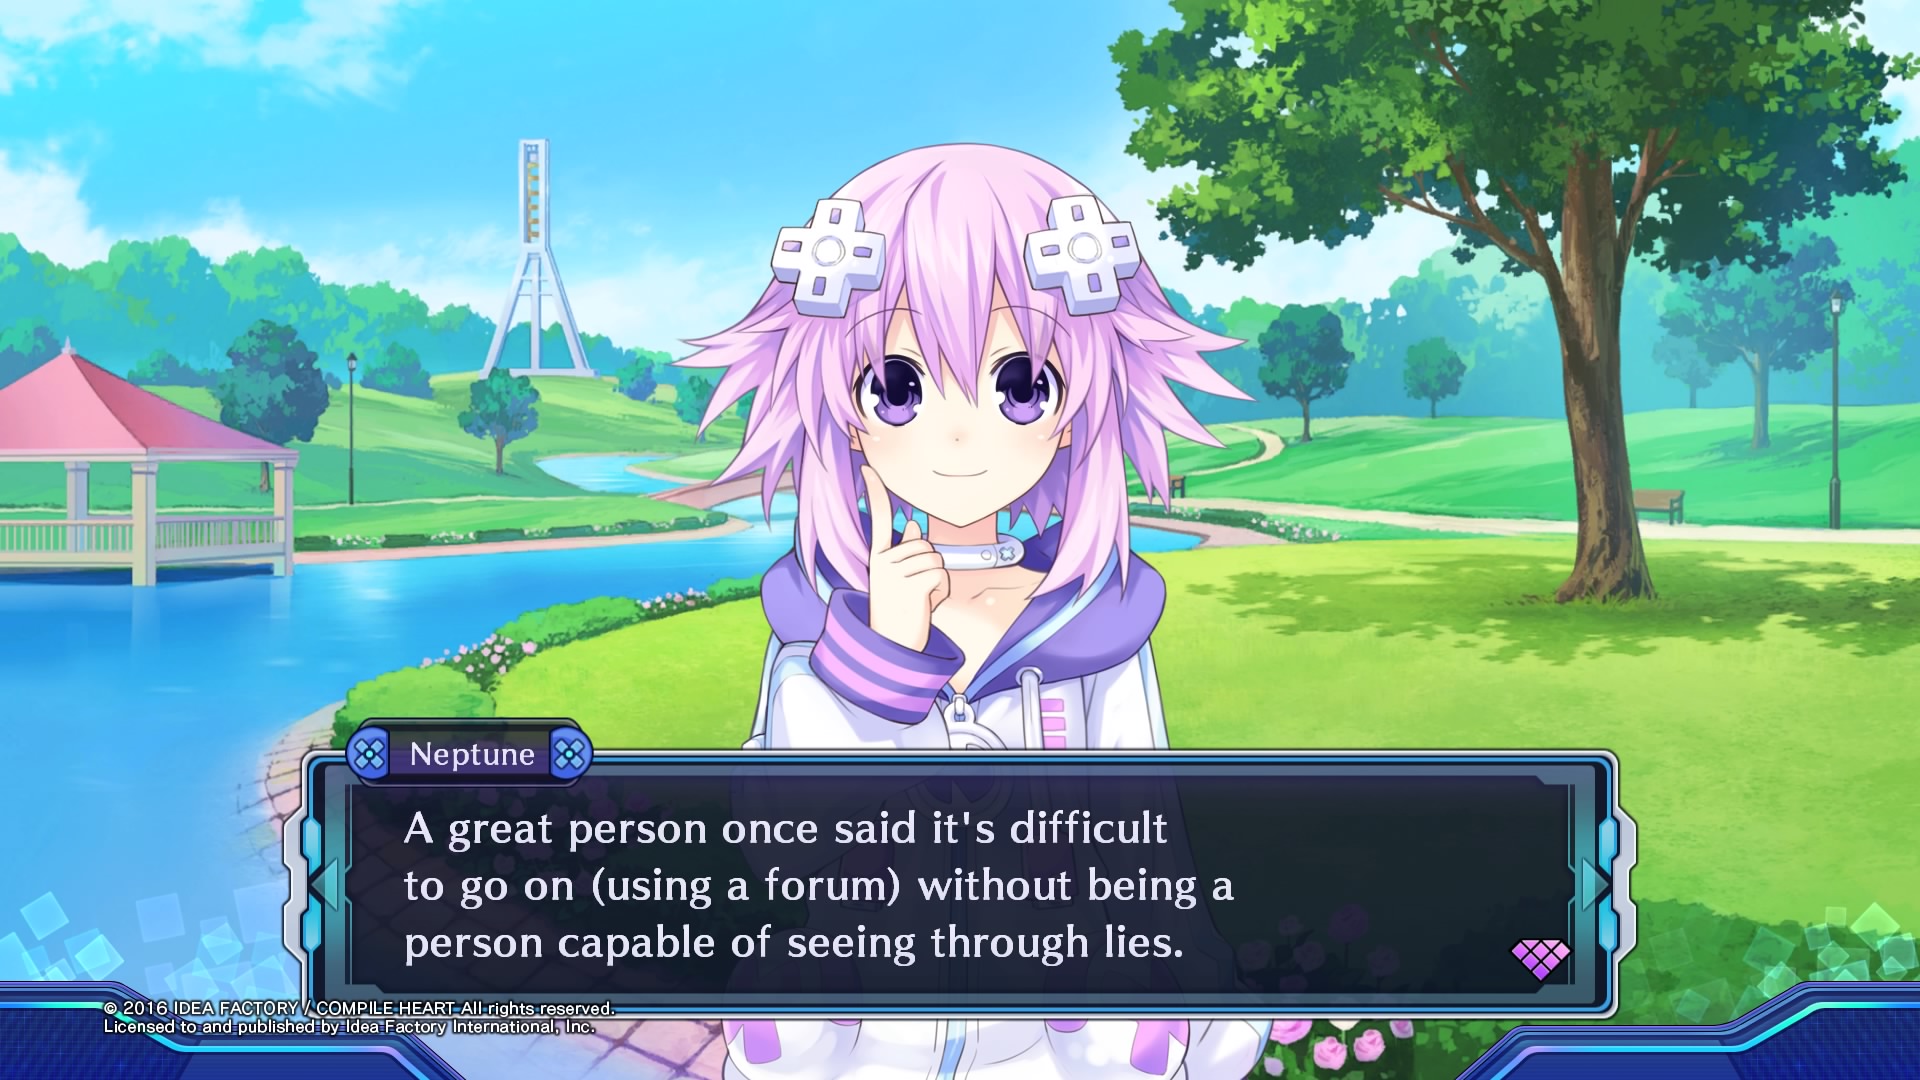 So wise. Neptune is so forum-wise.